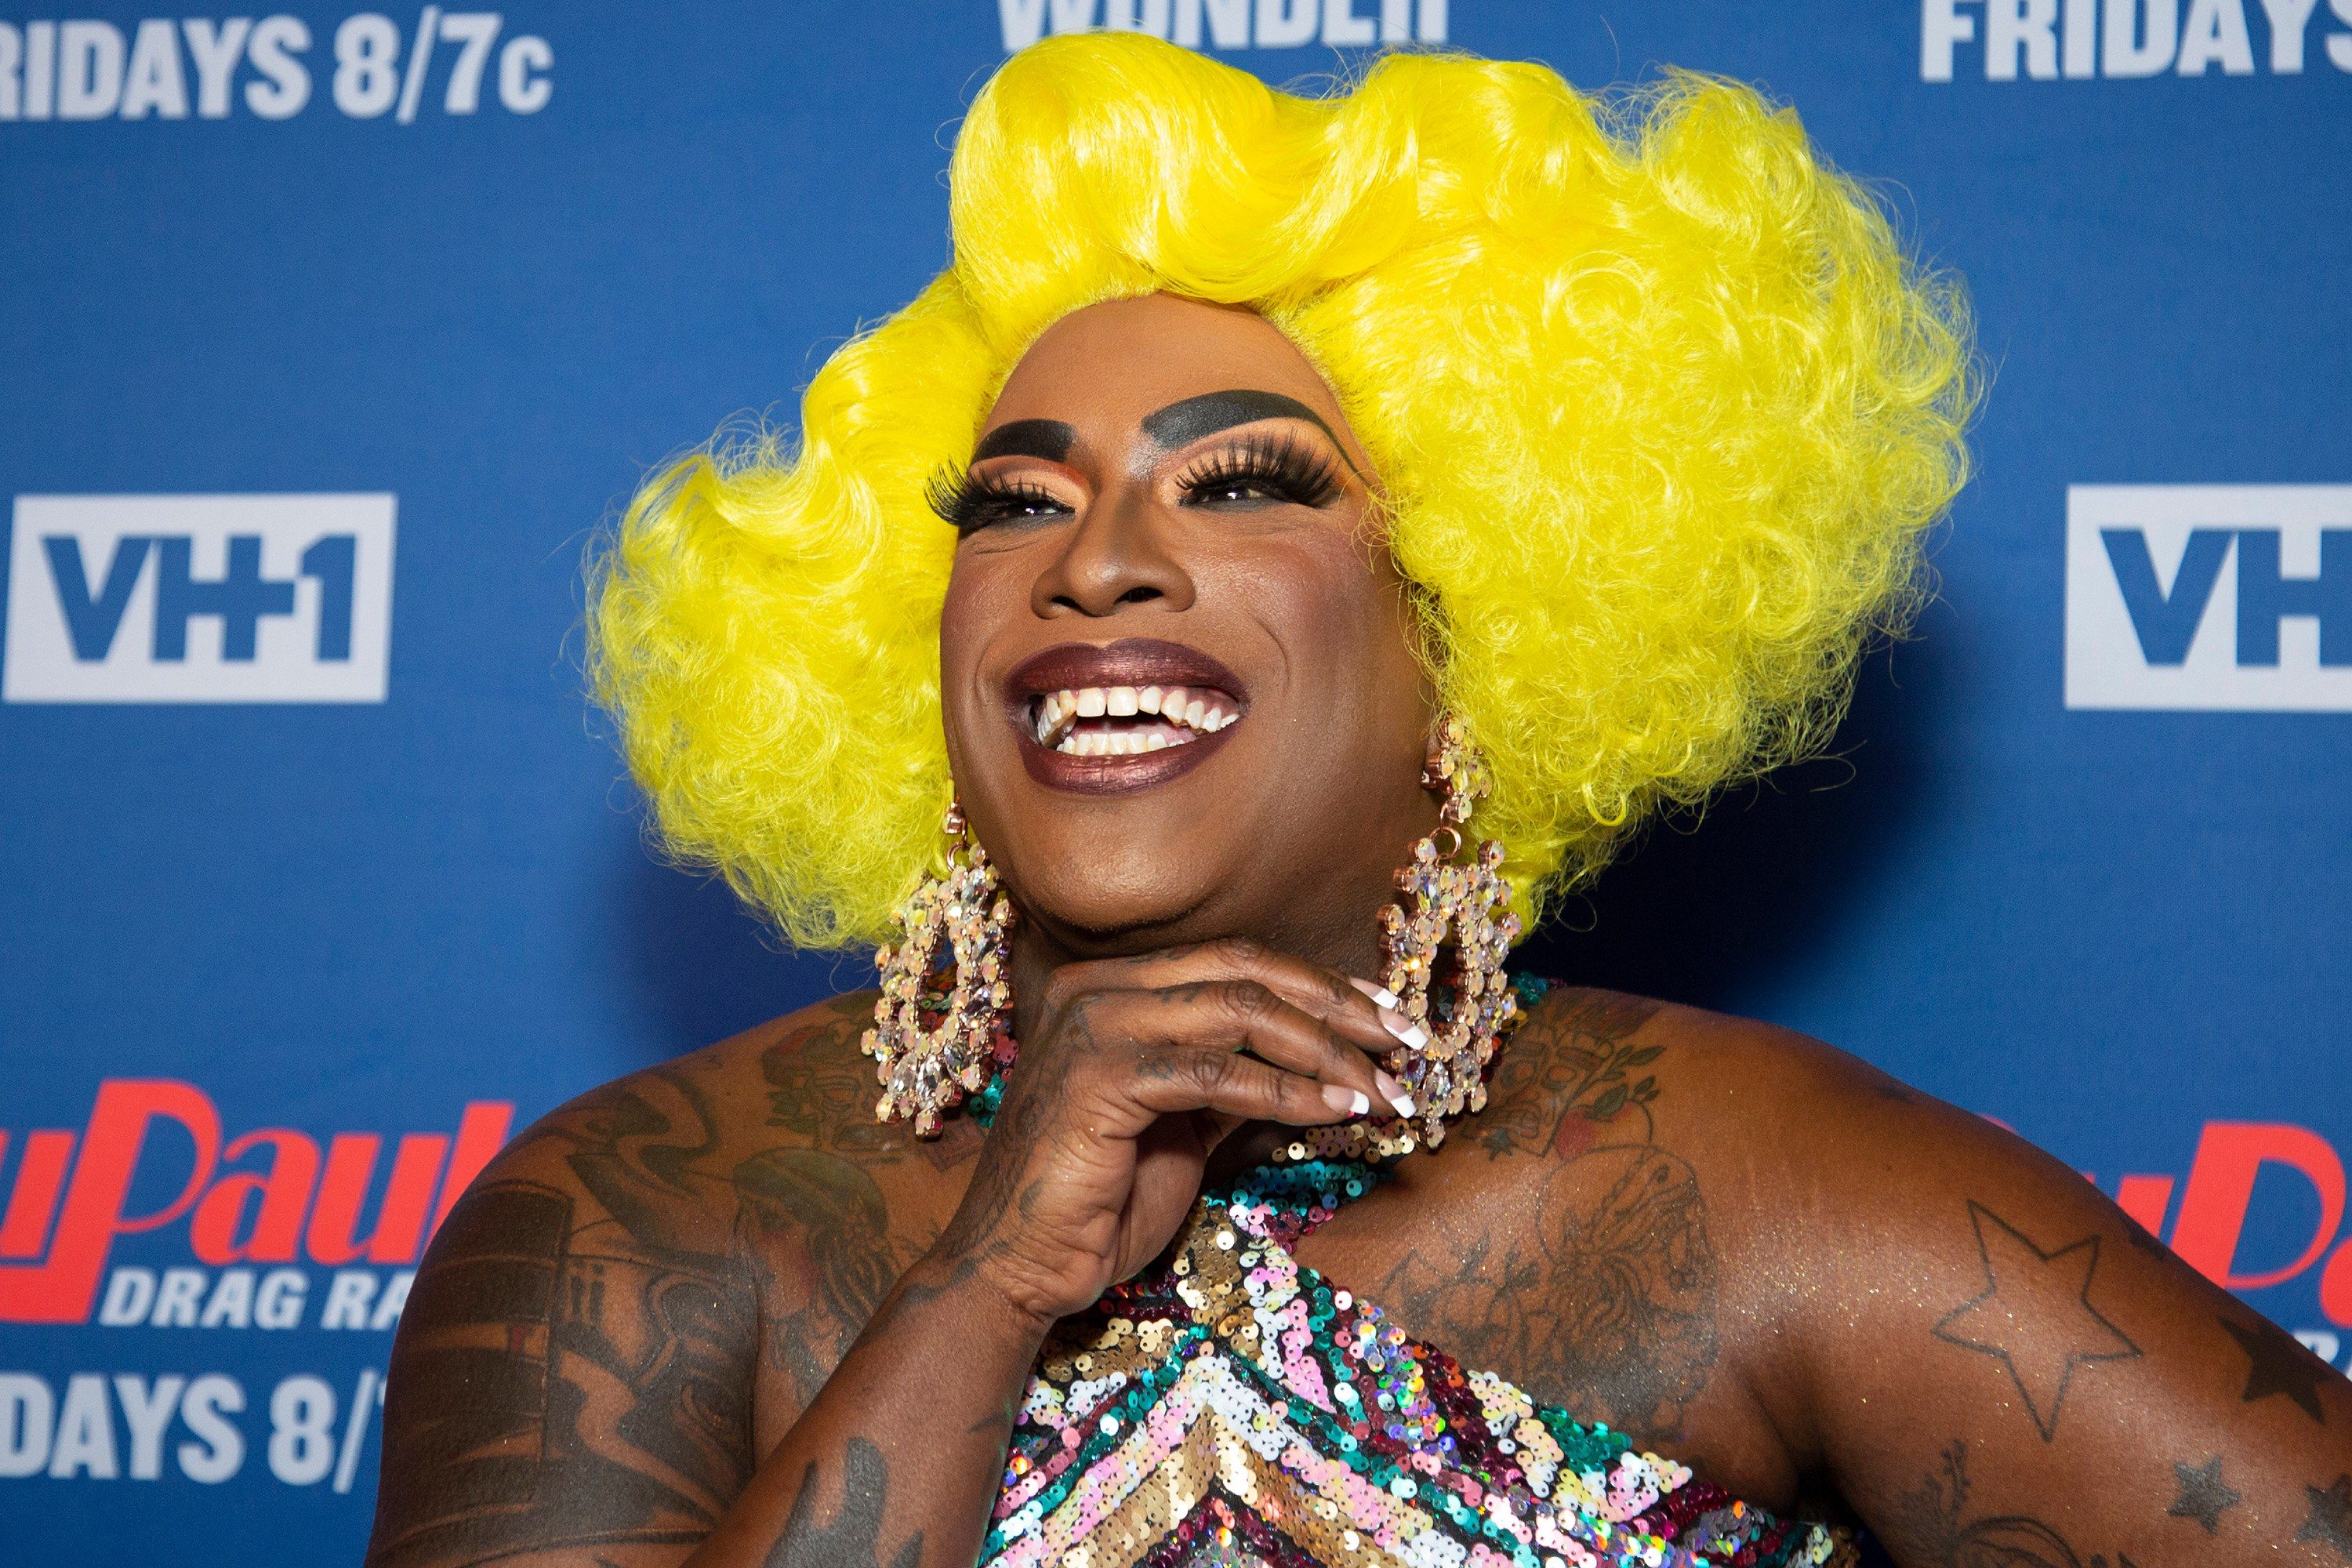 Drag Race Widow VonDu Arrested on Domestic Violence Charges